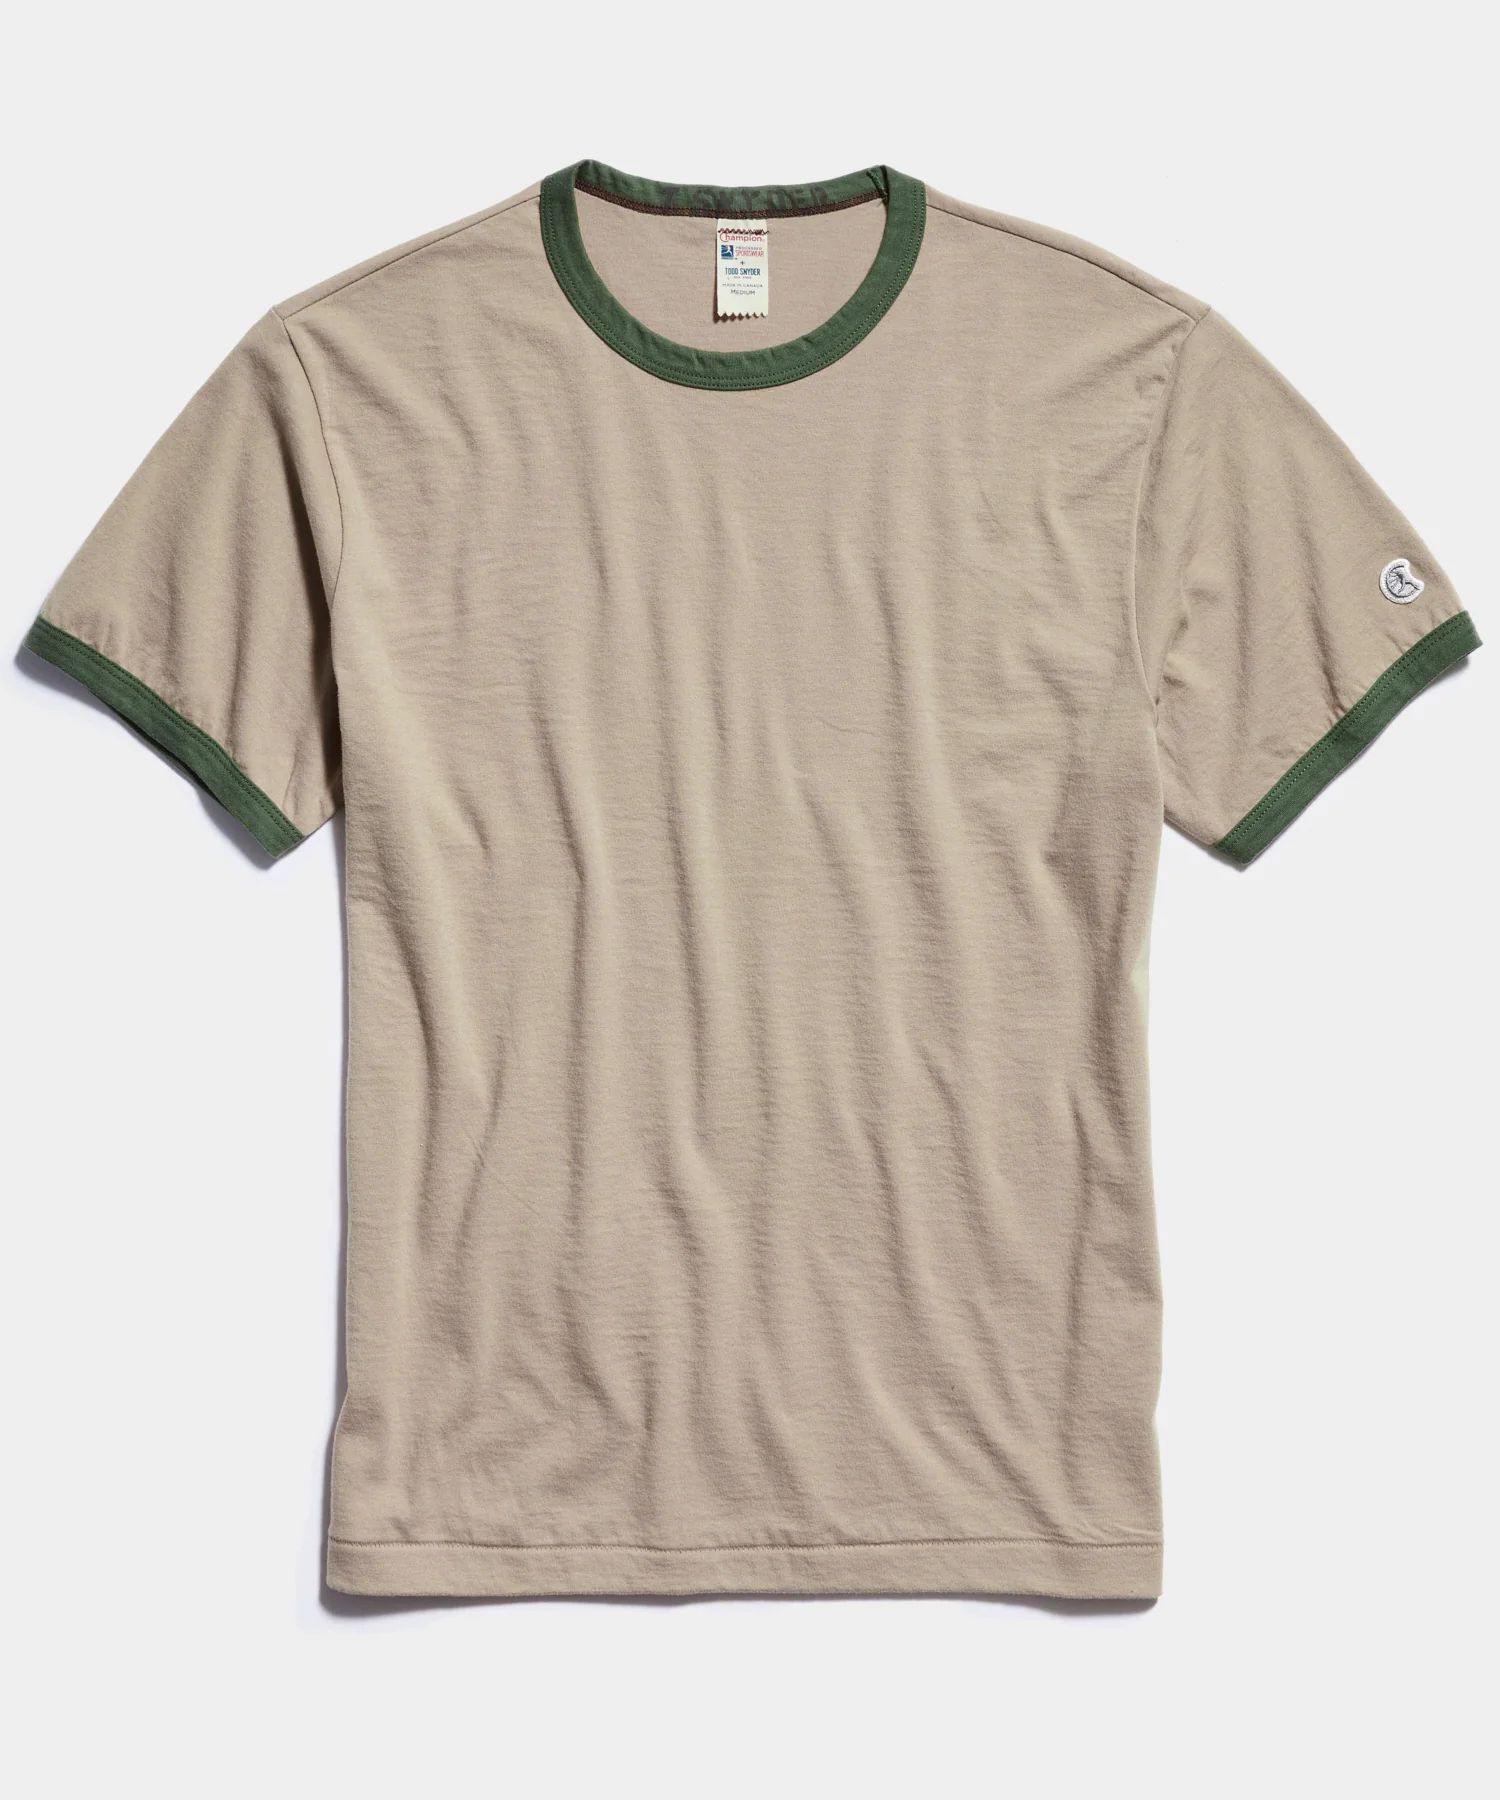 Champion Ringer Tee in Toasted Almond | Todd Snyder